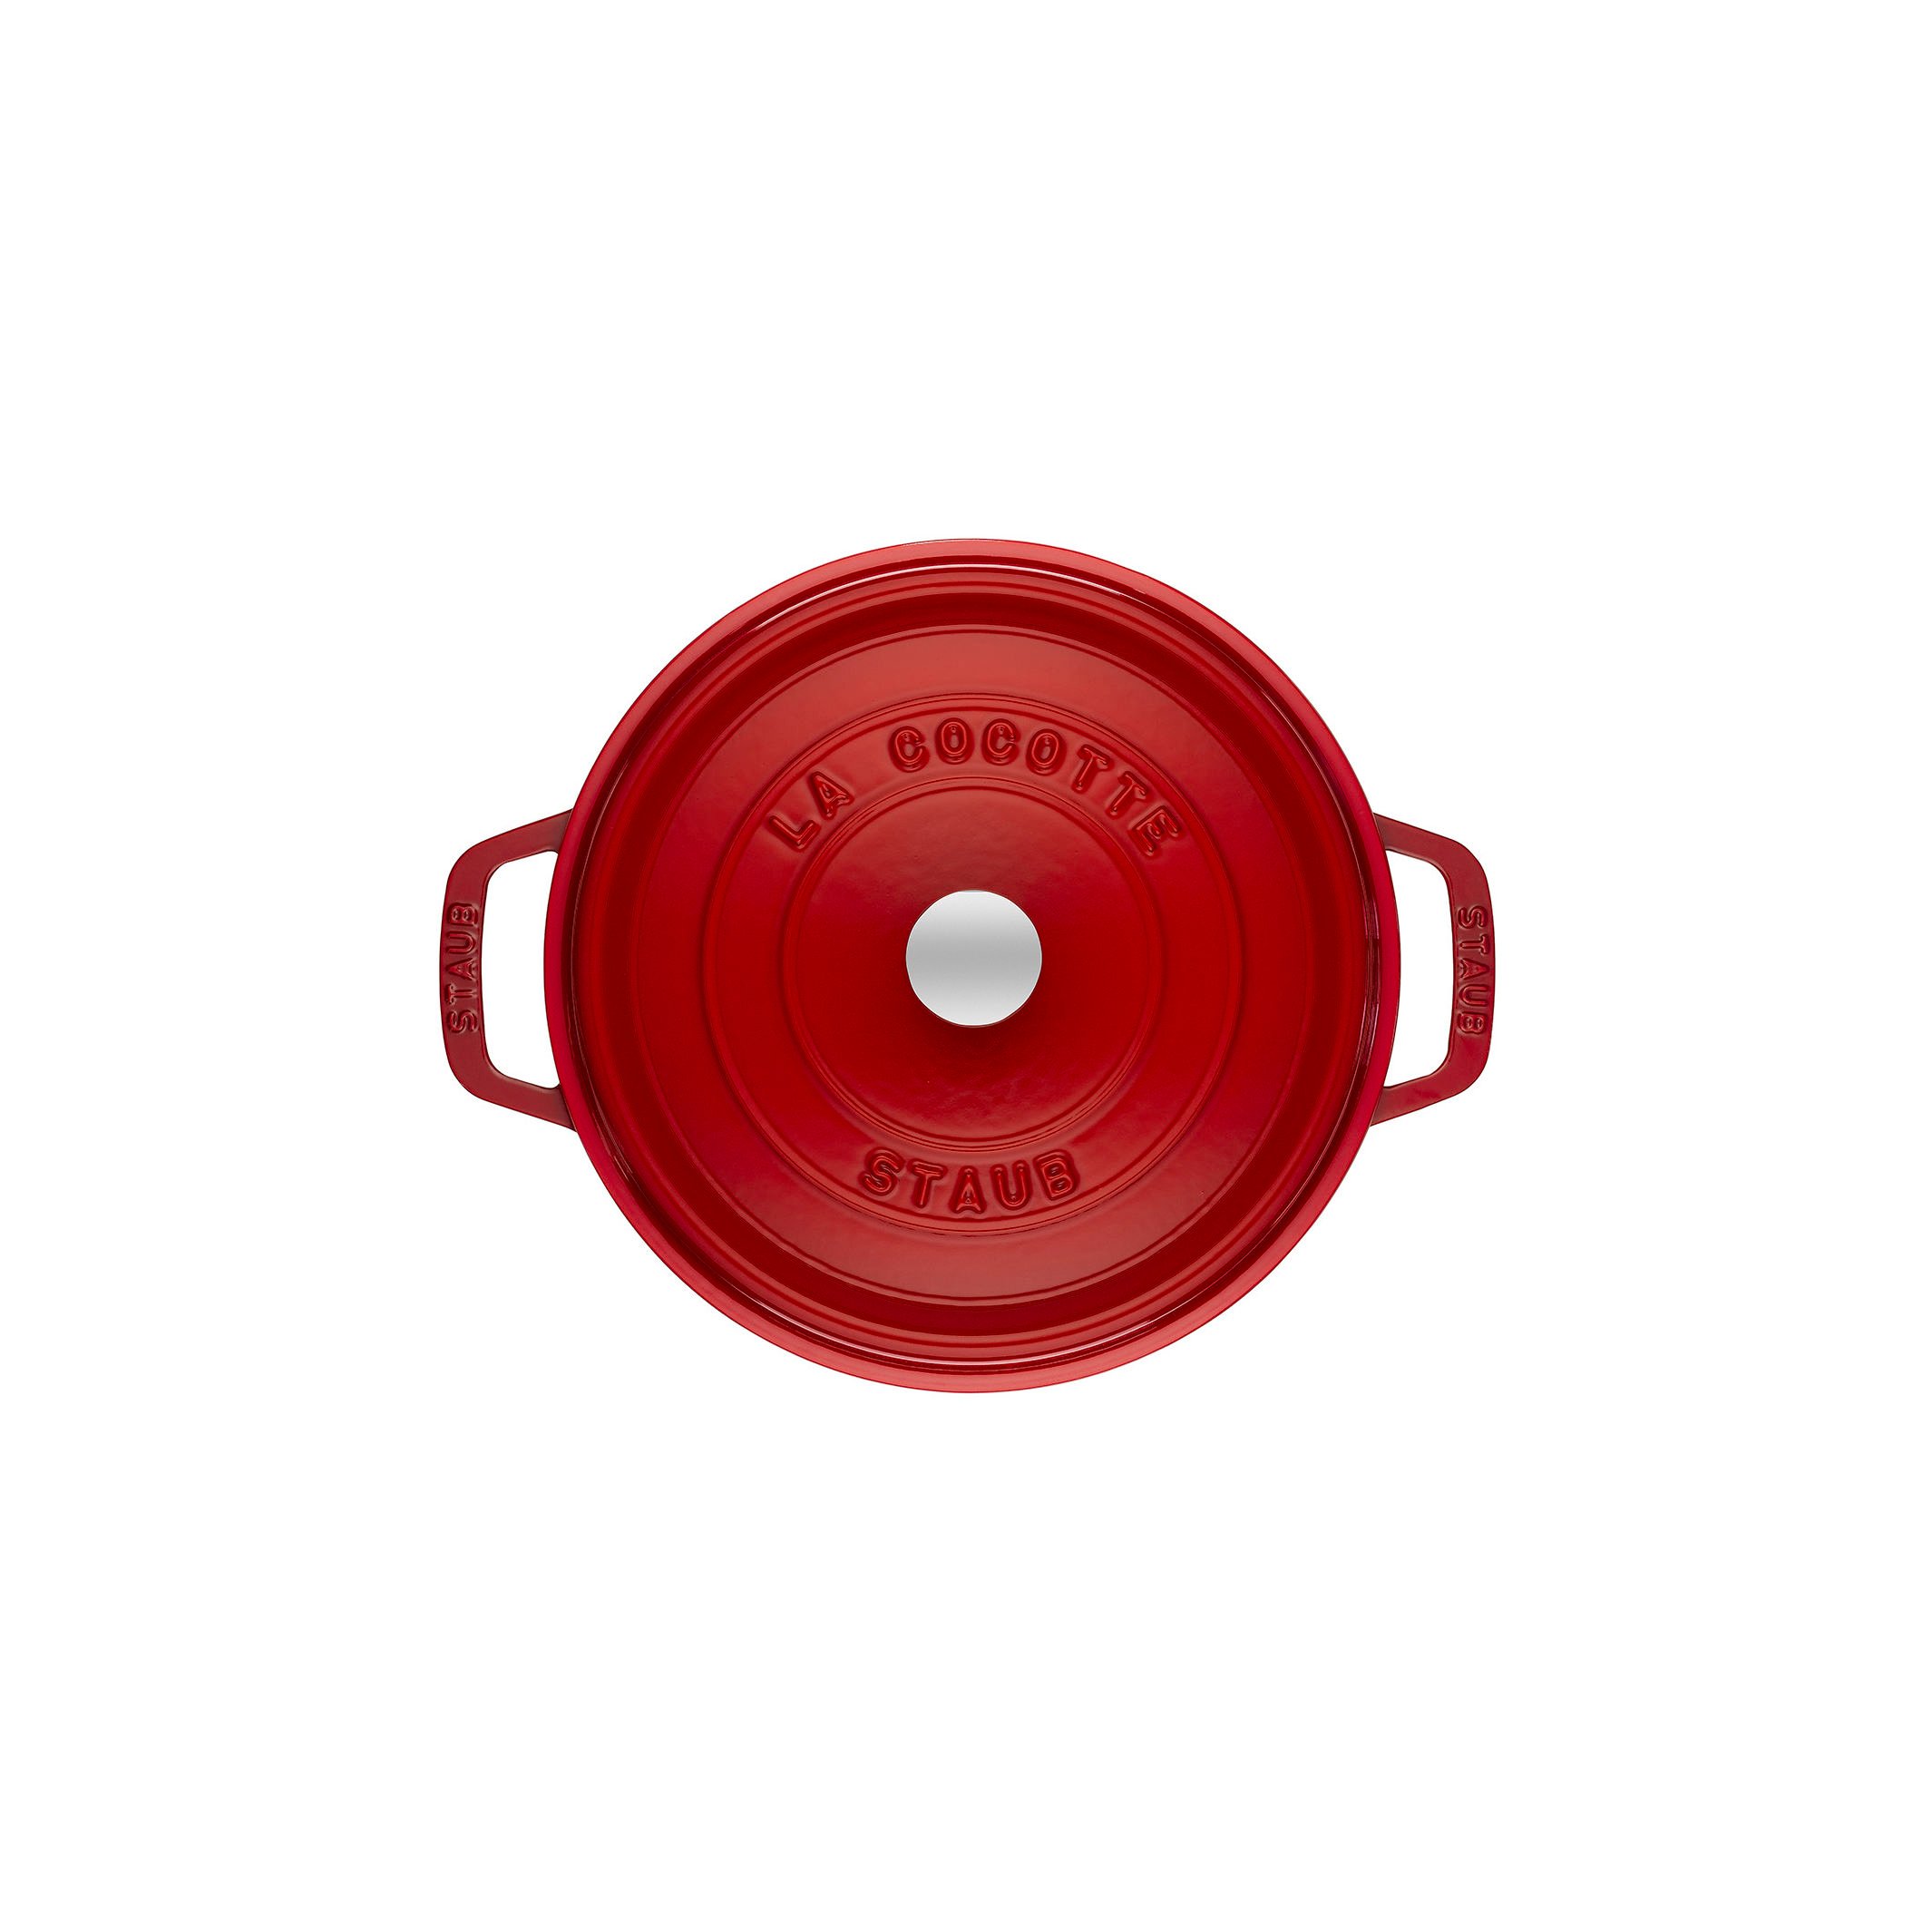 Staub Round Cocotte with steamer 26 cm, Grenadine red 40510-600-0 for sale